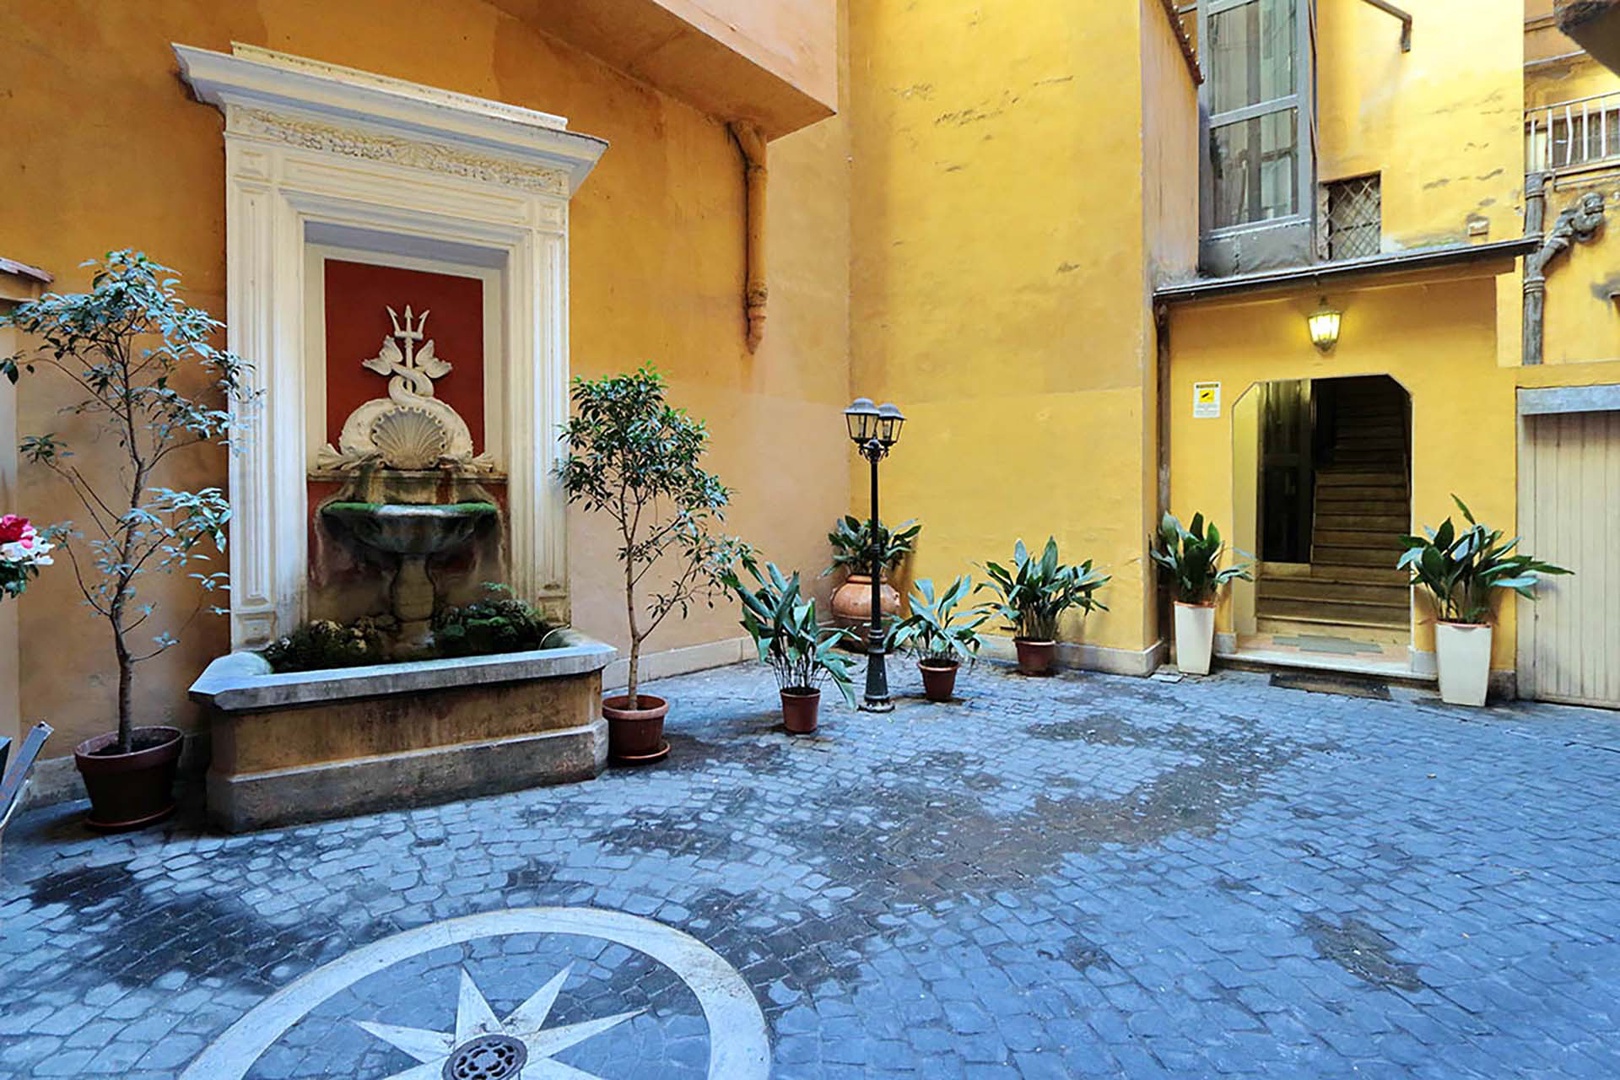 Pass by the tranquil fountain in the courtyard of Tartini Harmony